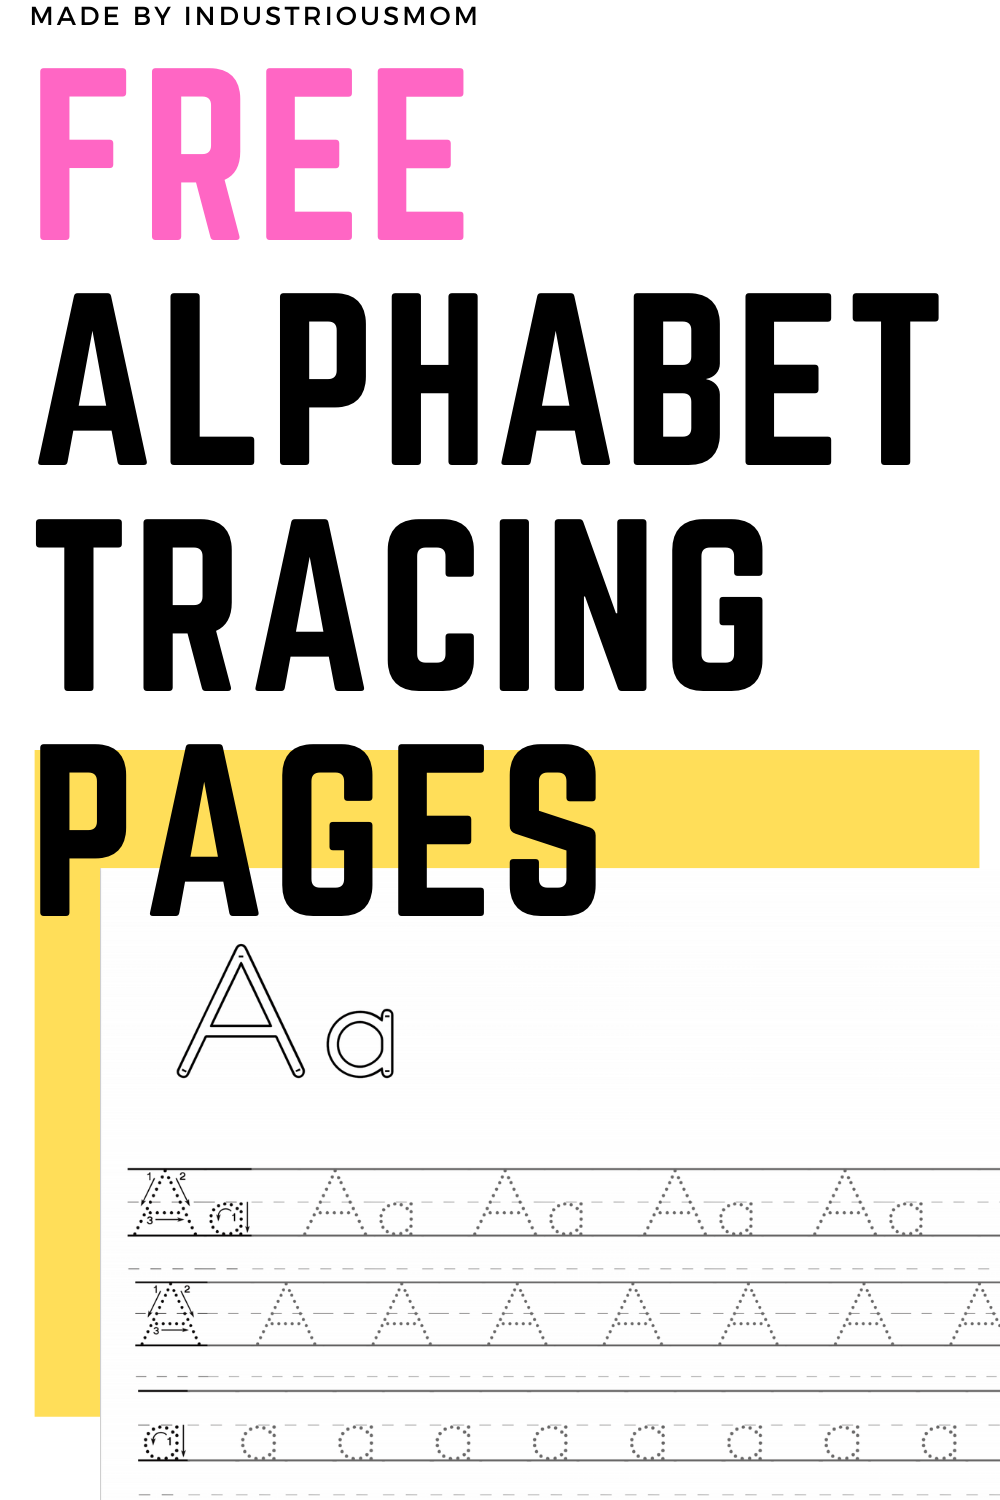 Free Traceable Alphabet for Kindergarten and Elementary